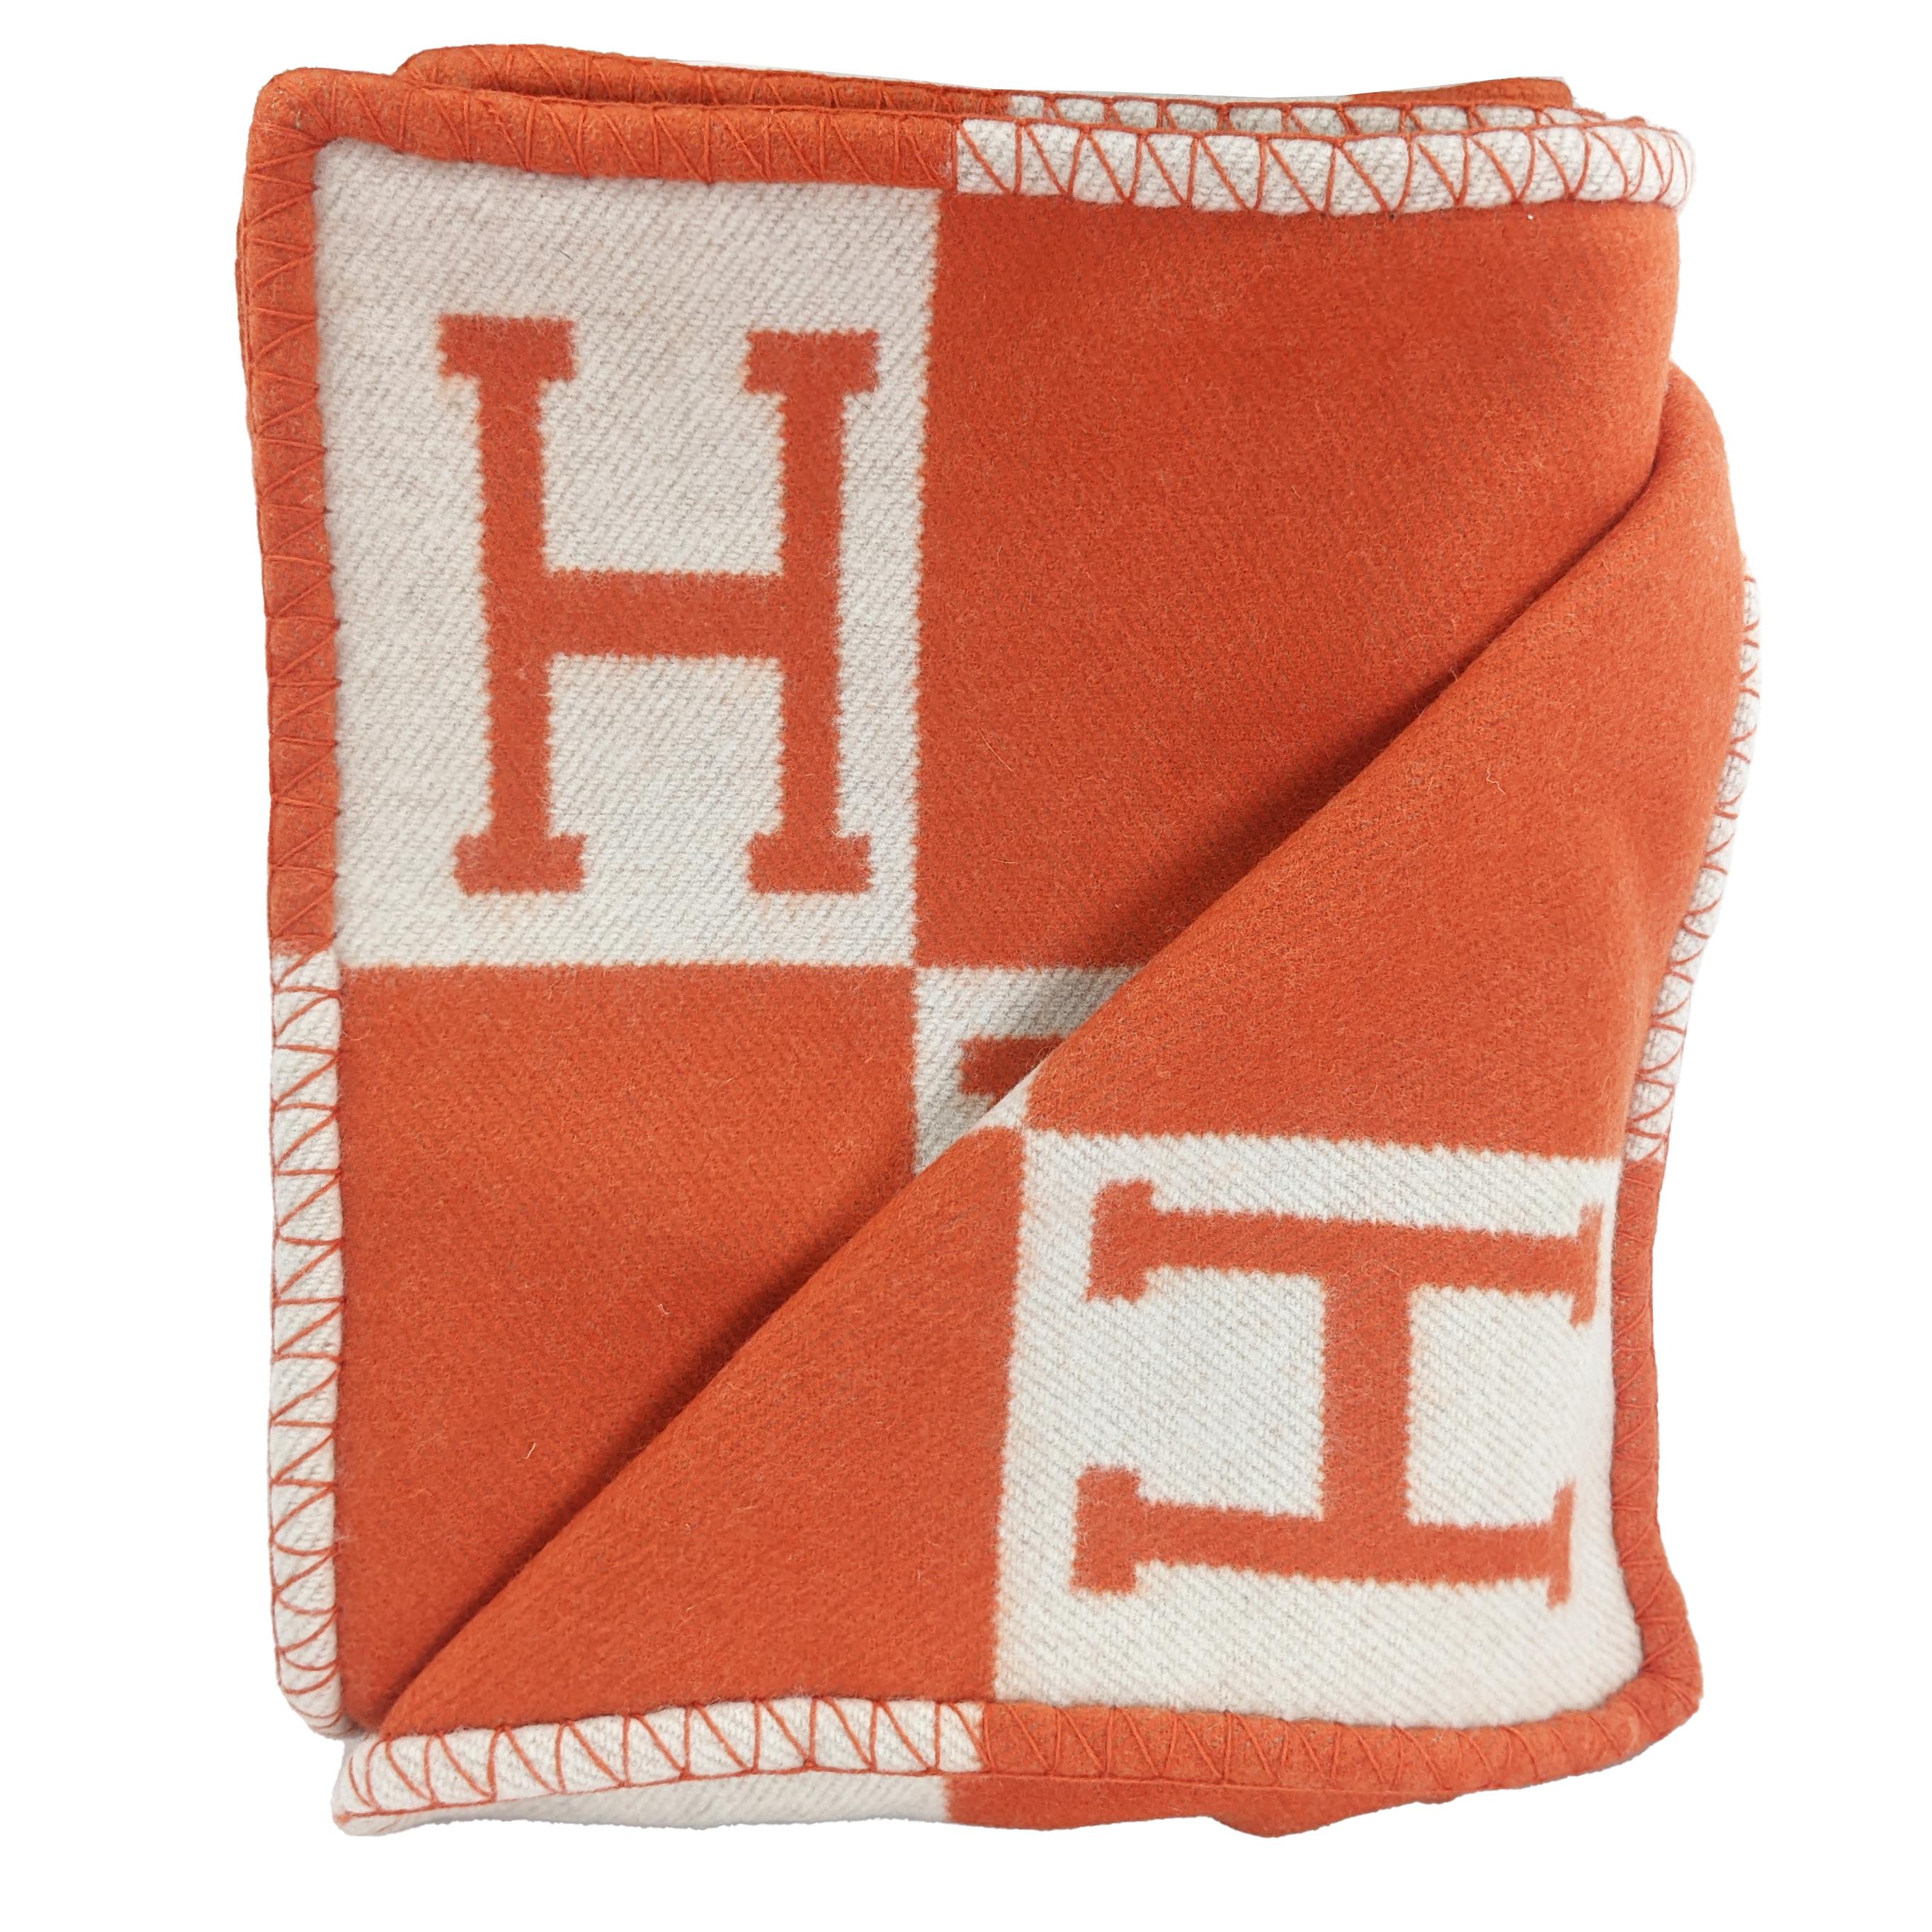 Condition: This authentic Hermes blanket is in great pre-loved condition. There is light pilling throughout the blanket.

No storage accessories included

Features: Orange and white wool and cashmere-blend Hermes Avalon throw blanket with H motif